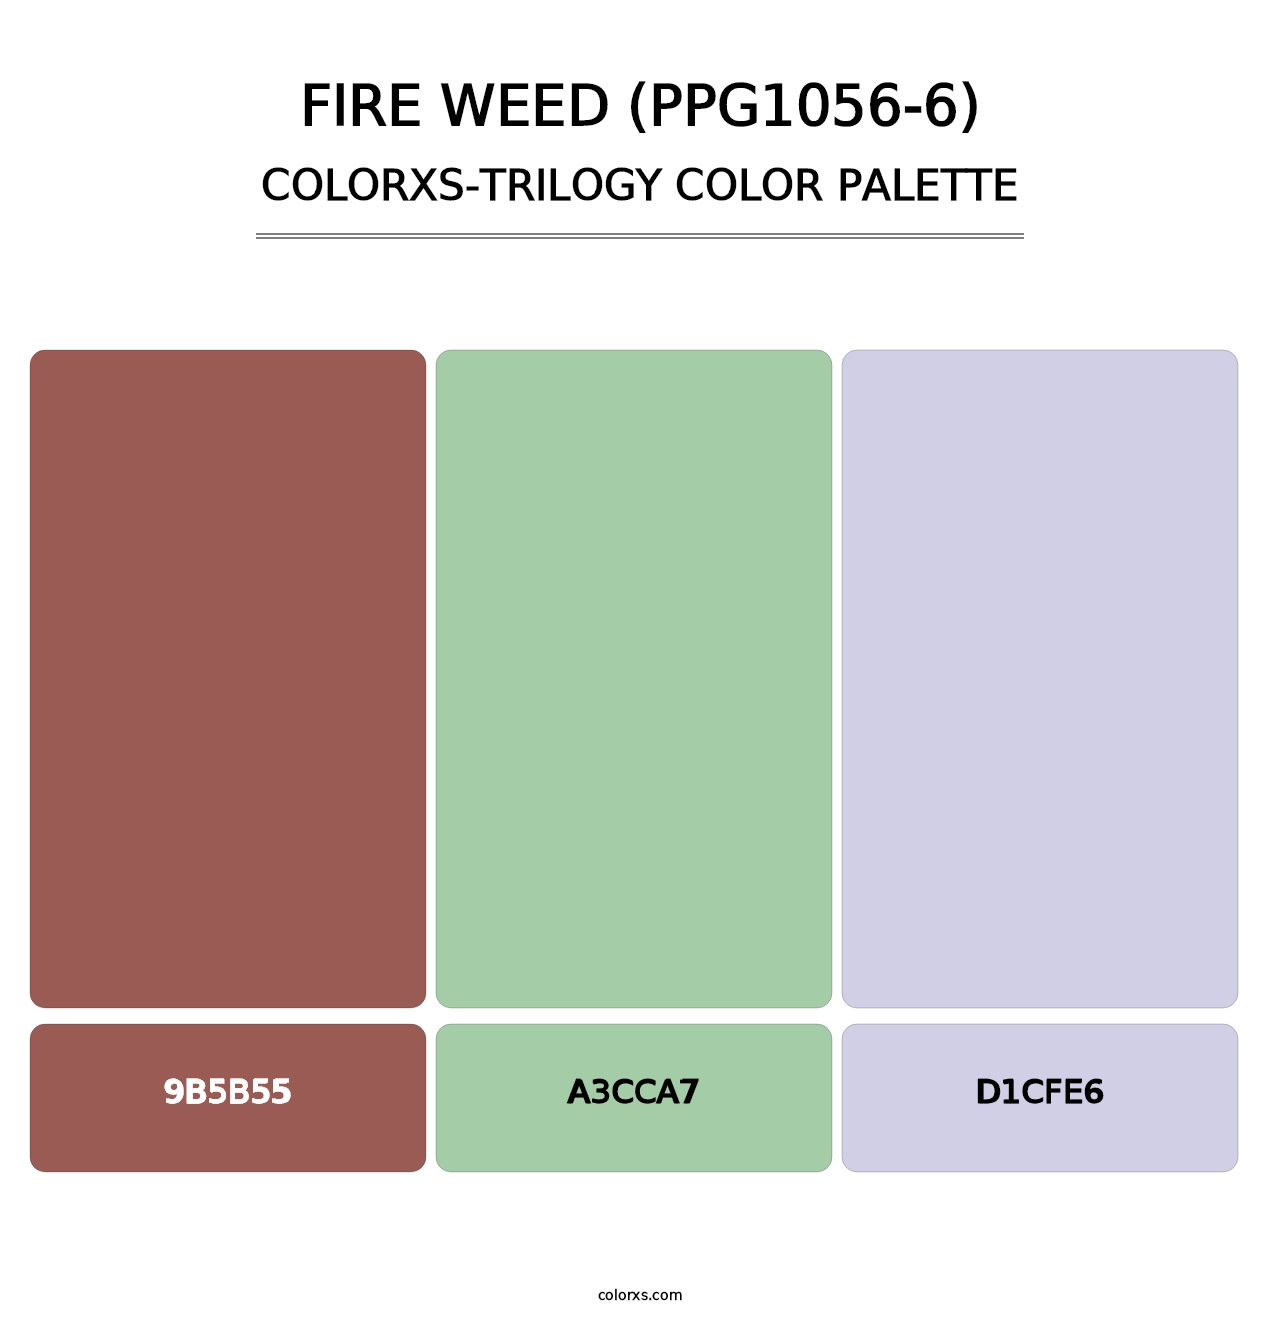 Fire Weed (PPG1056-6) - Colorxs Trilogy Palette